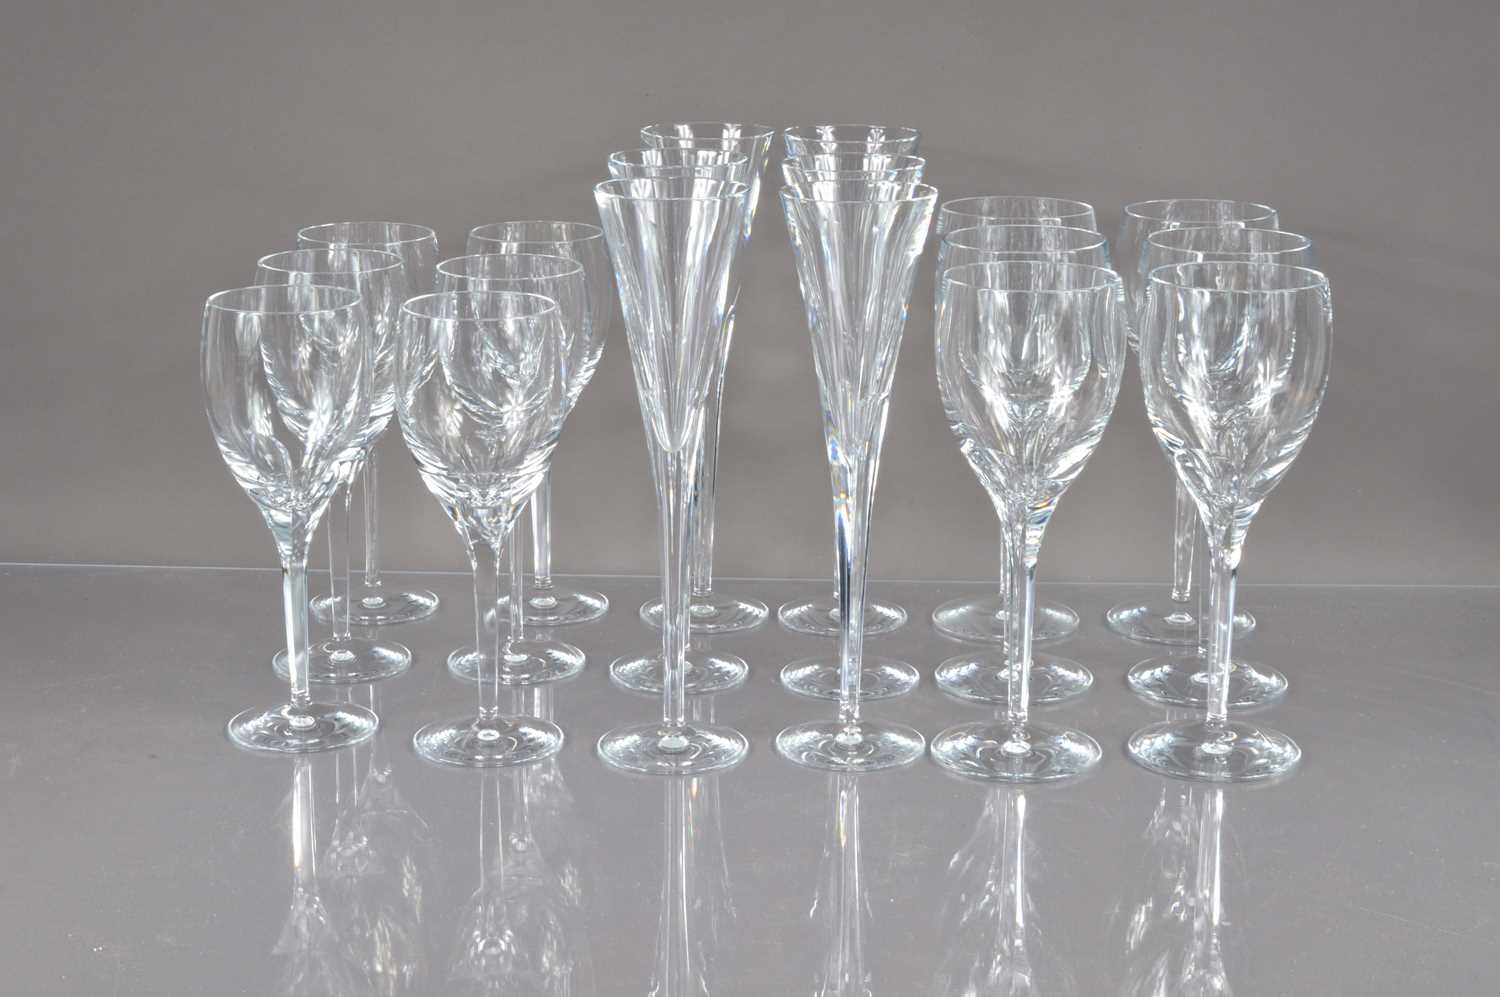 An elegant set of crystal glasses for six people by John Rocha for Waterford, - Image 3 of 4